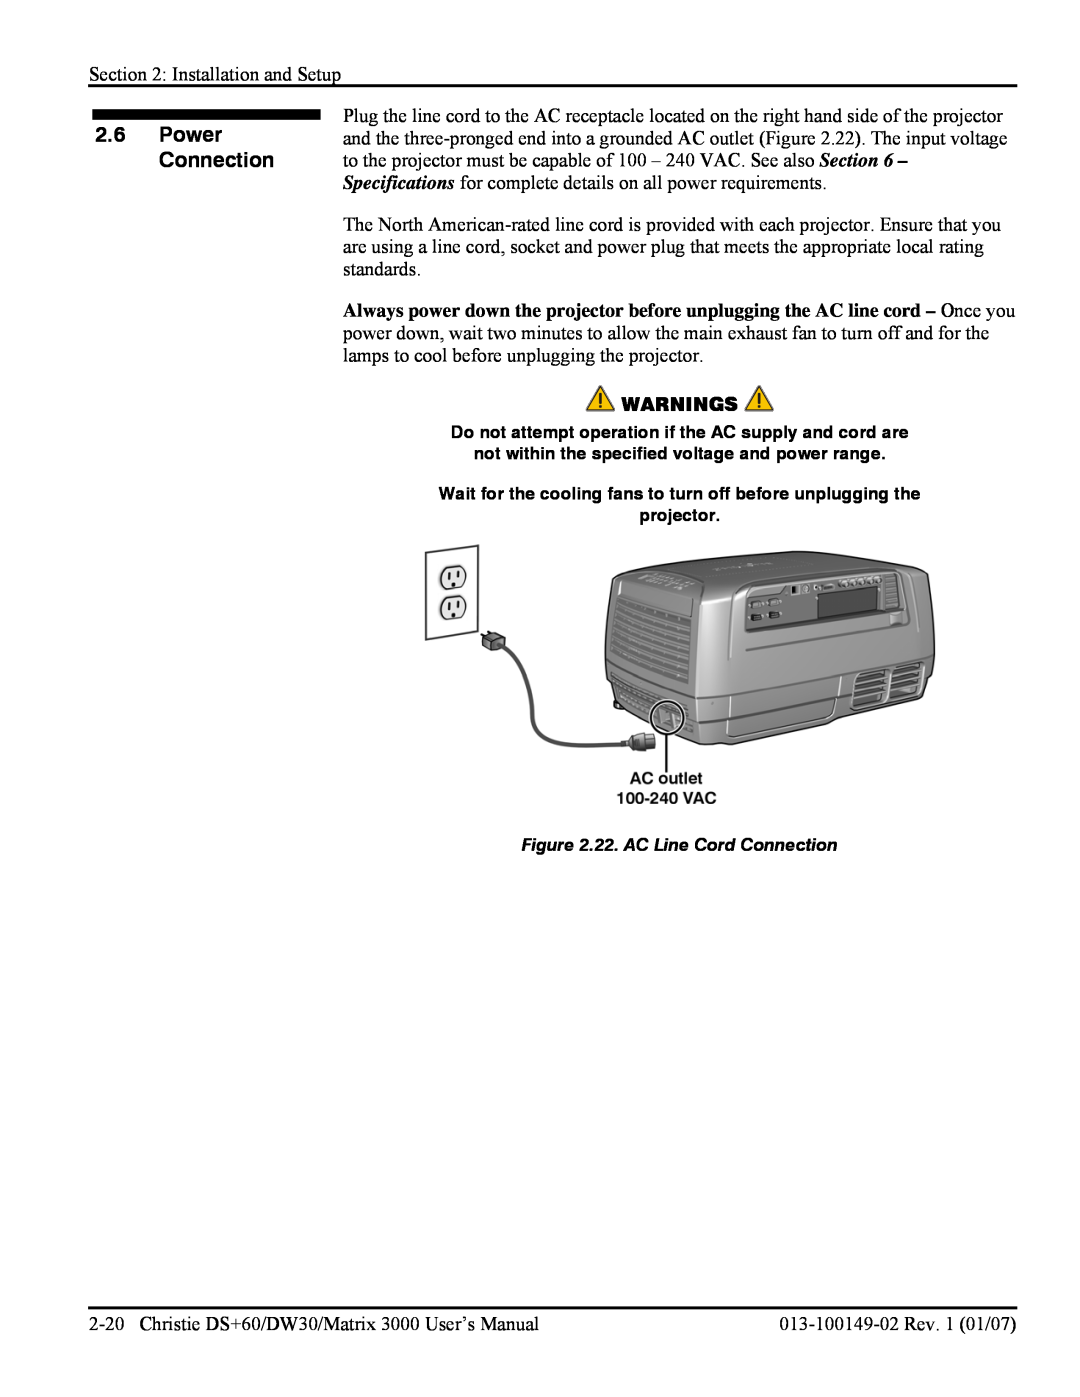 Texas Instruments DW30, MATRIX 3000 user manual Power Connection, Warnings 